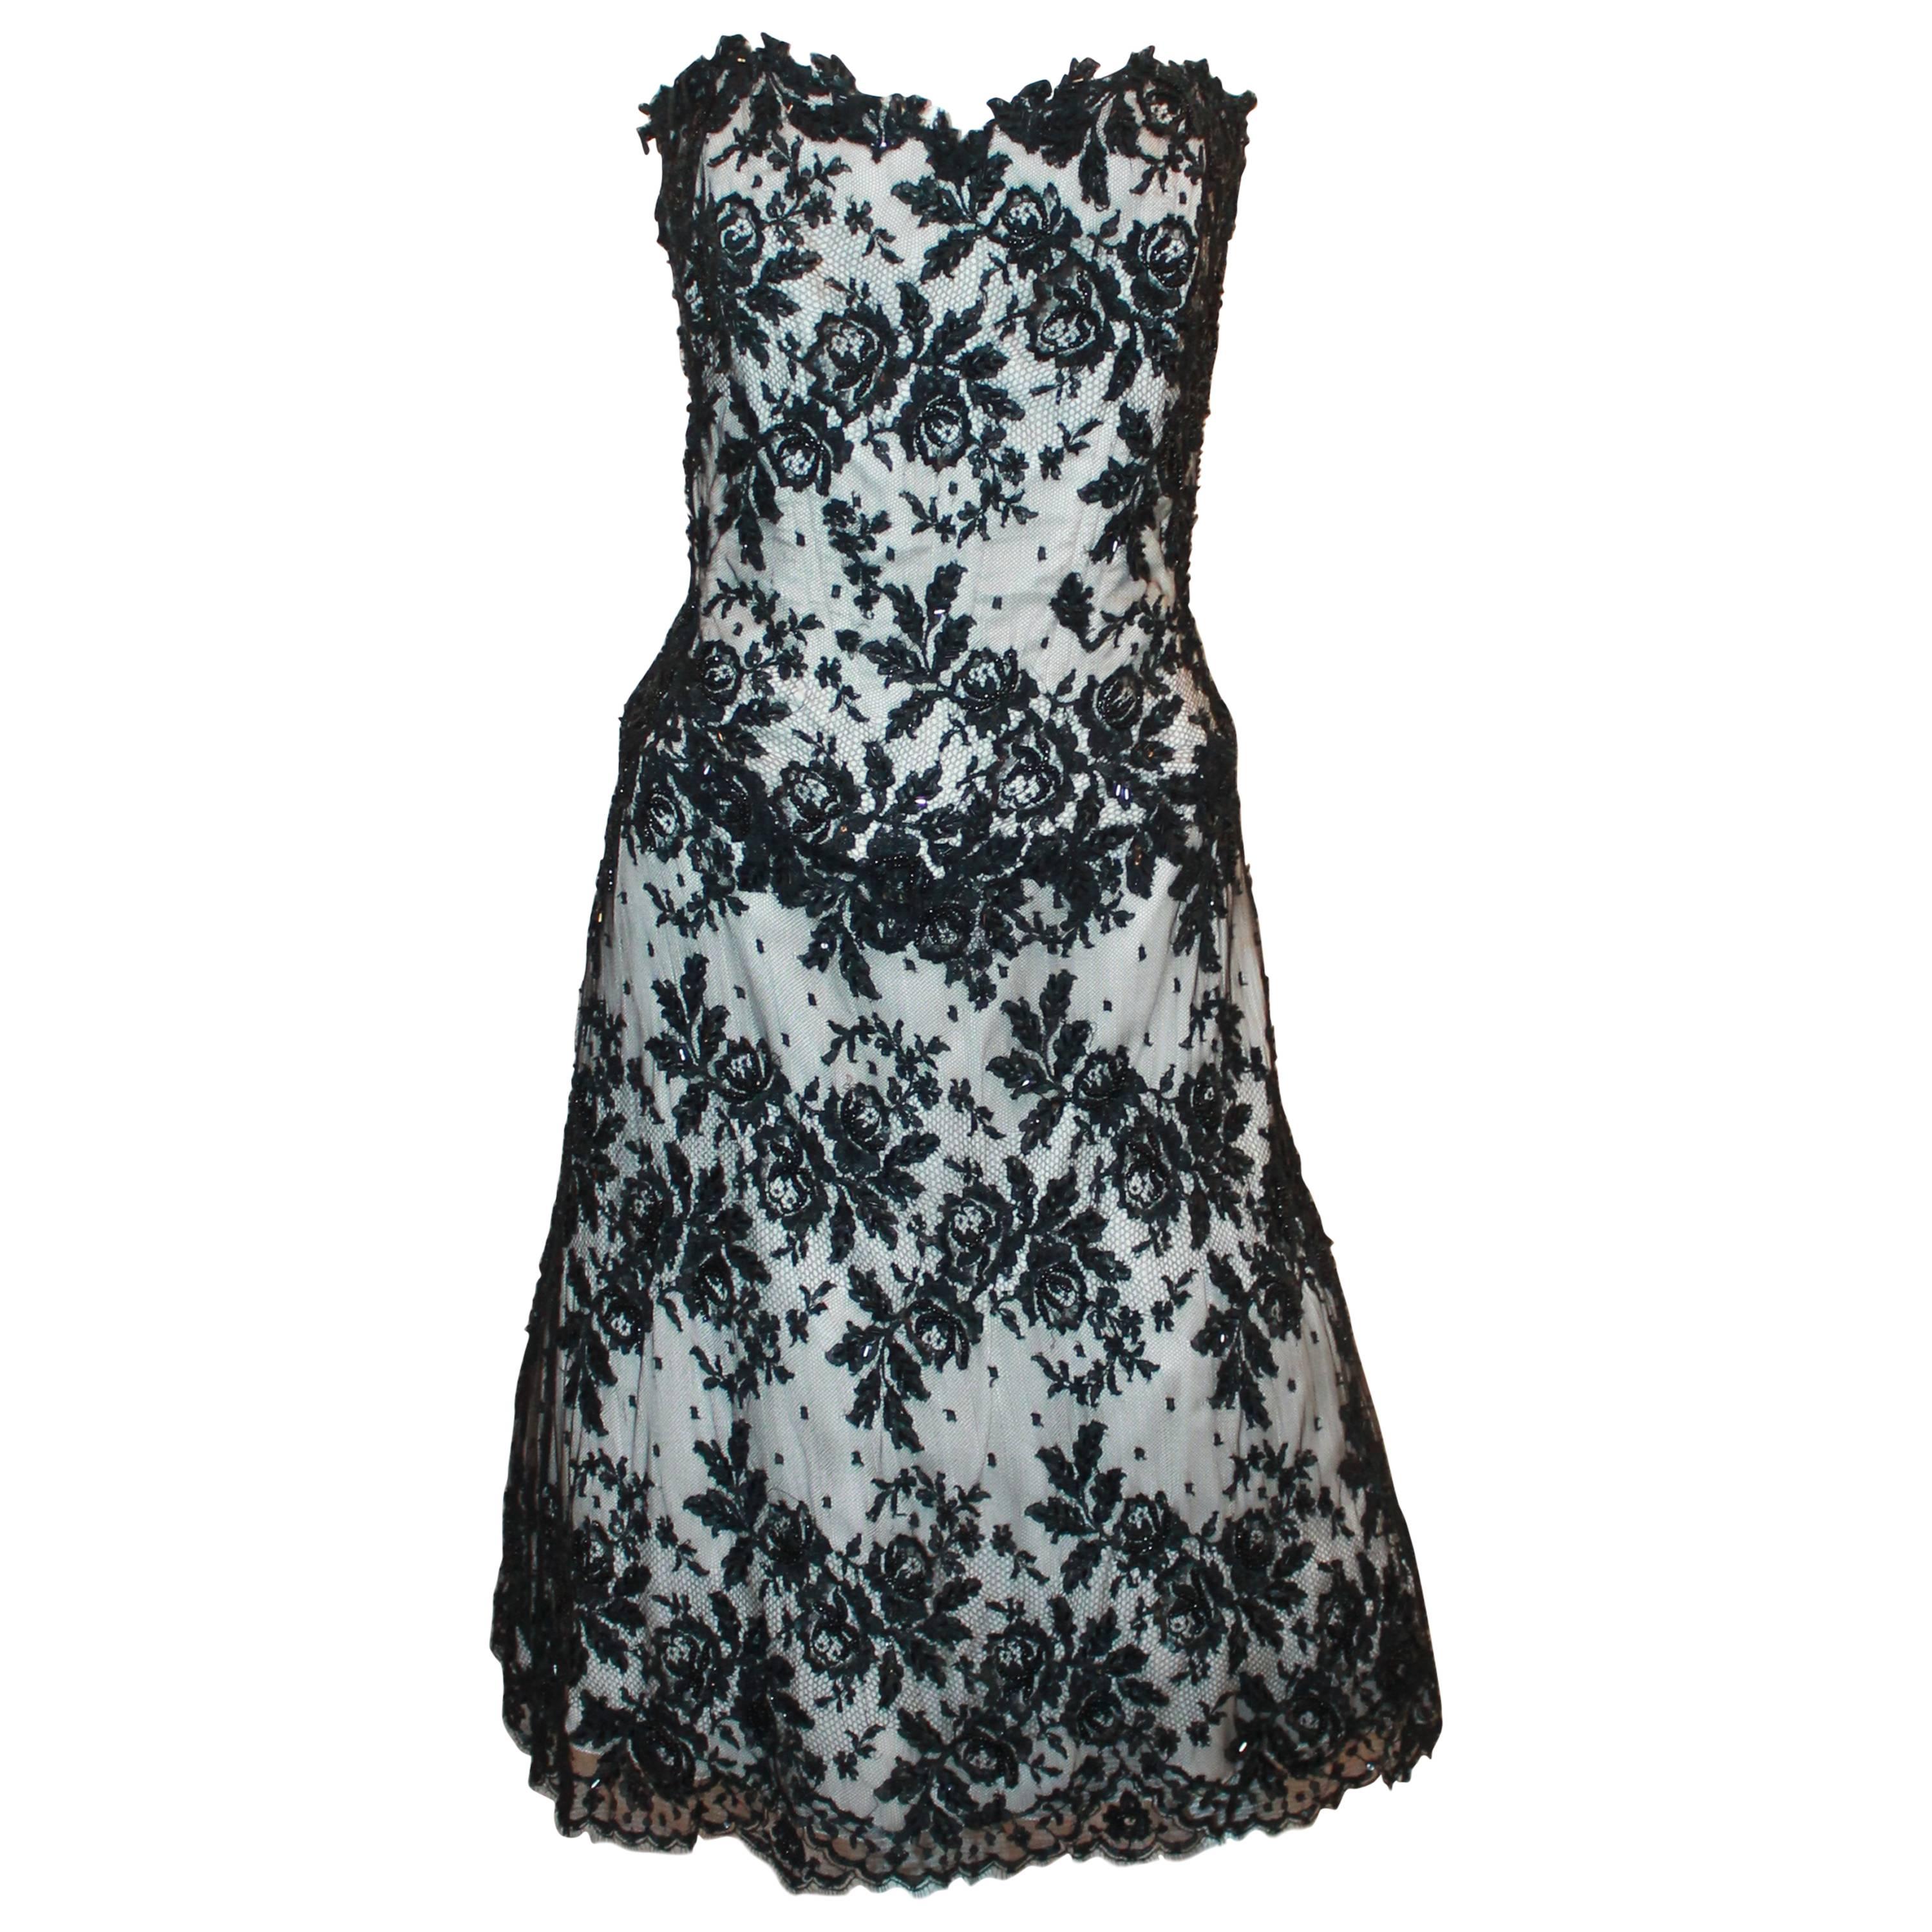 Vicky Tiel Black & White Lace Strapless Dress w/ Beading - 44 For Sale